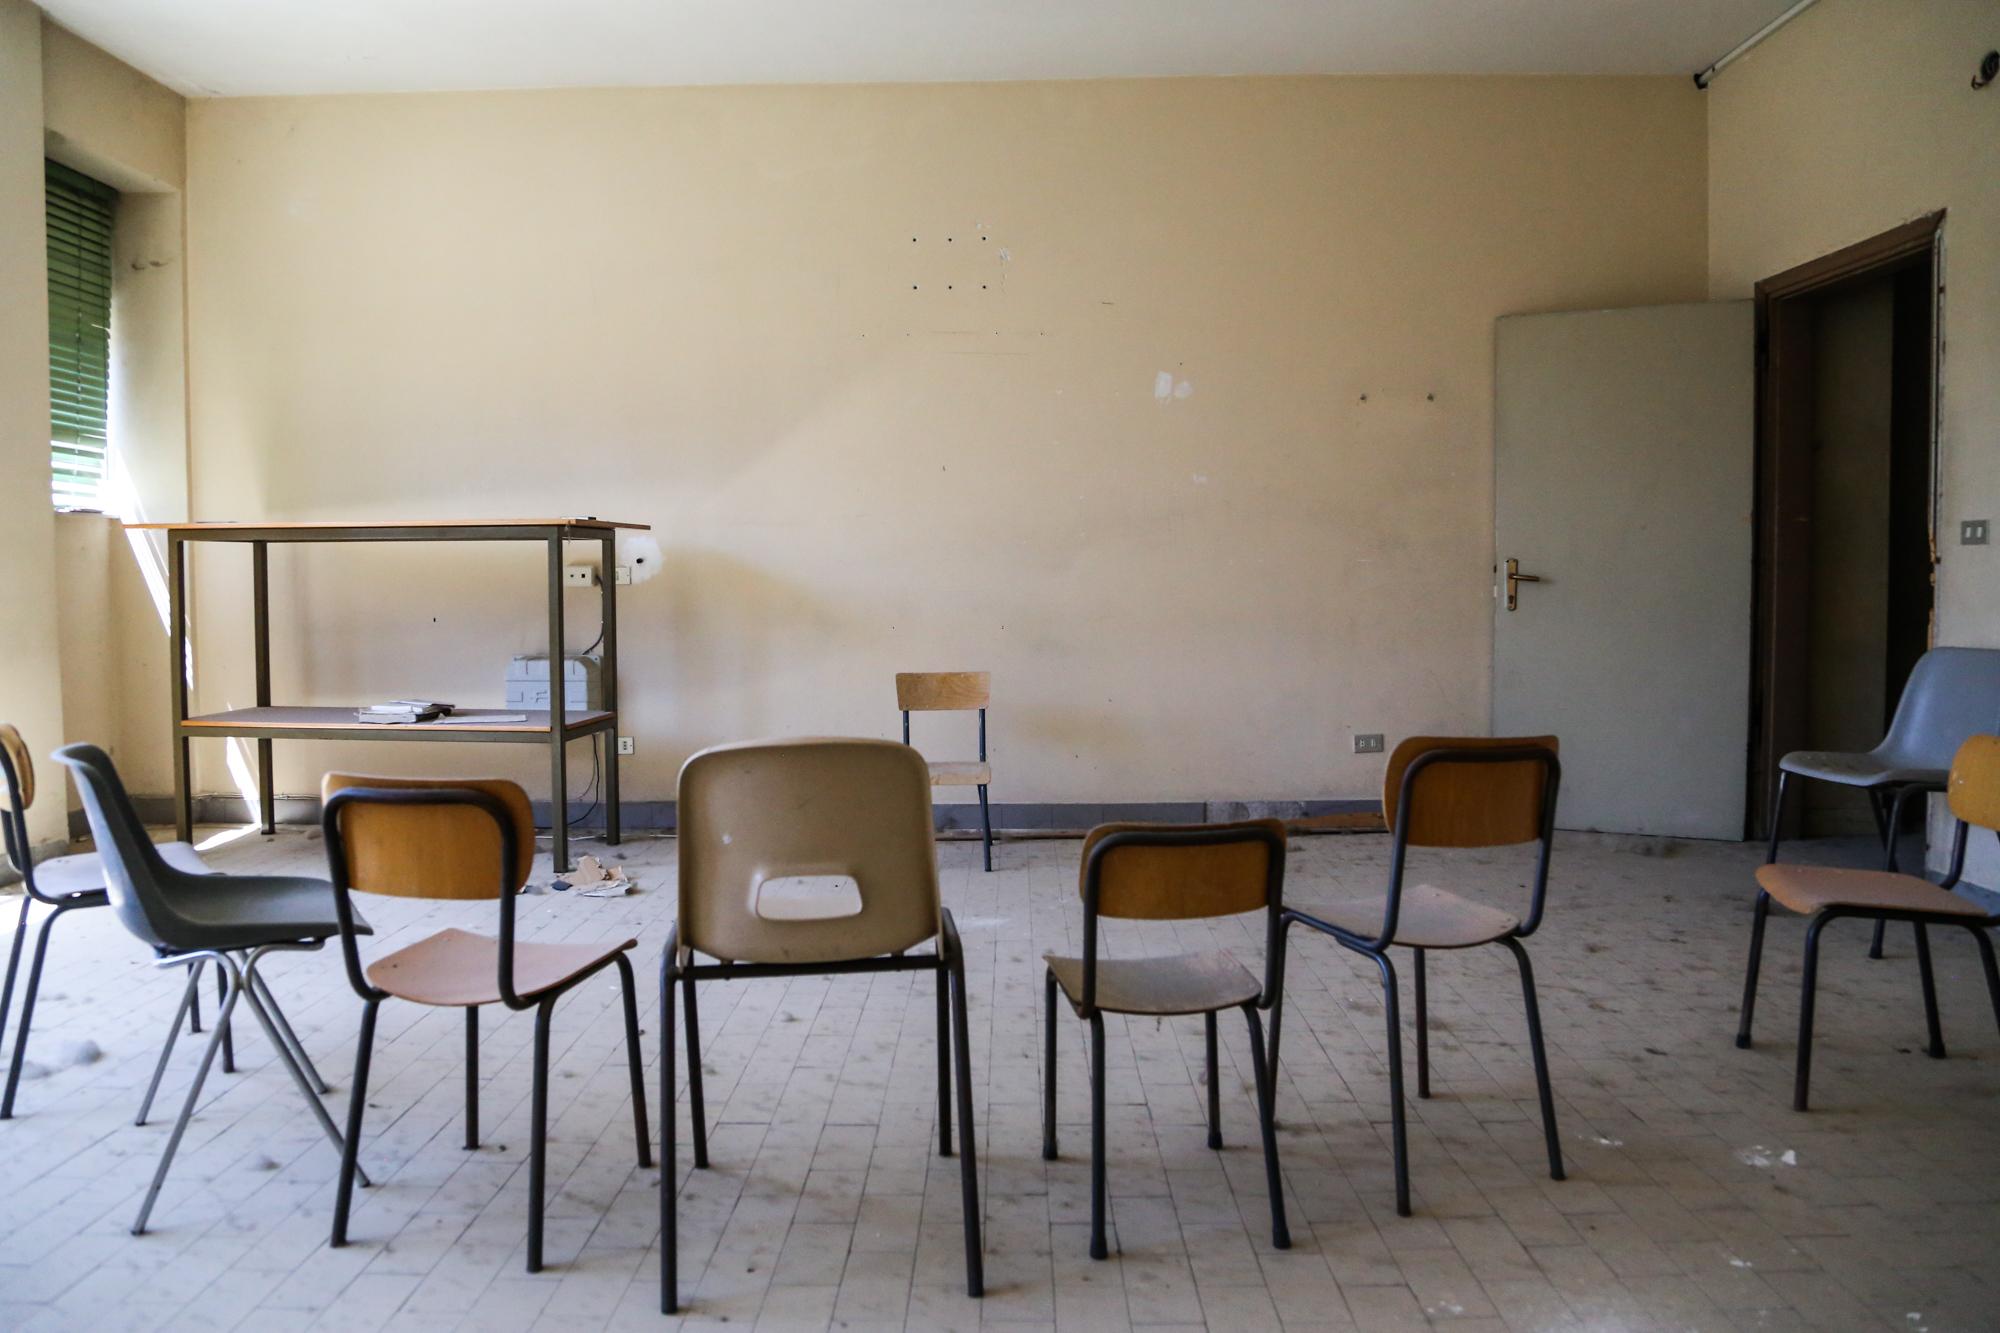 13 years without. Failure to rebuild public schools in L'Aquila